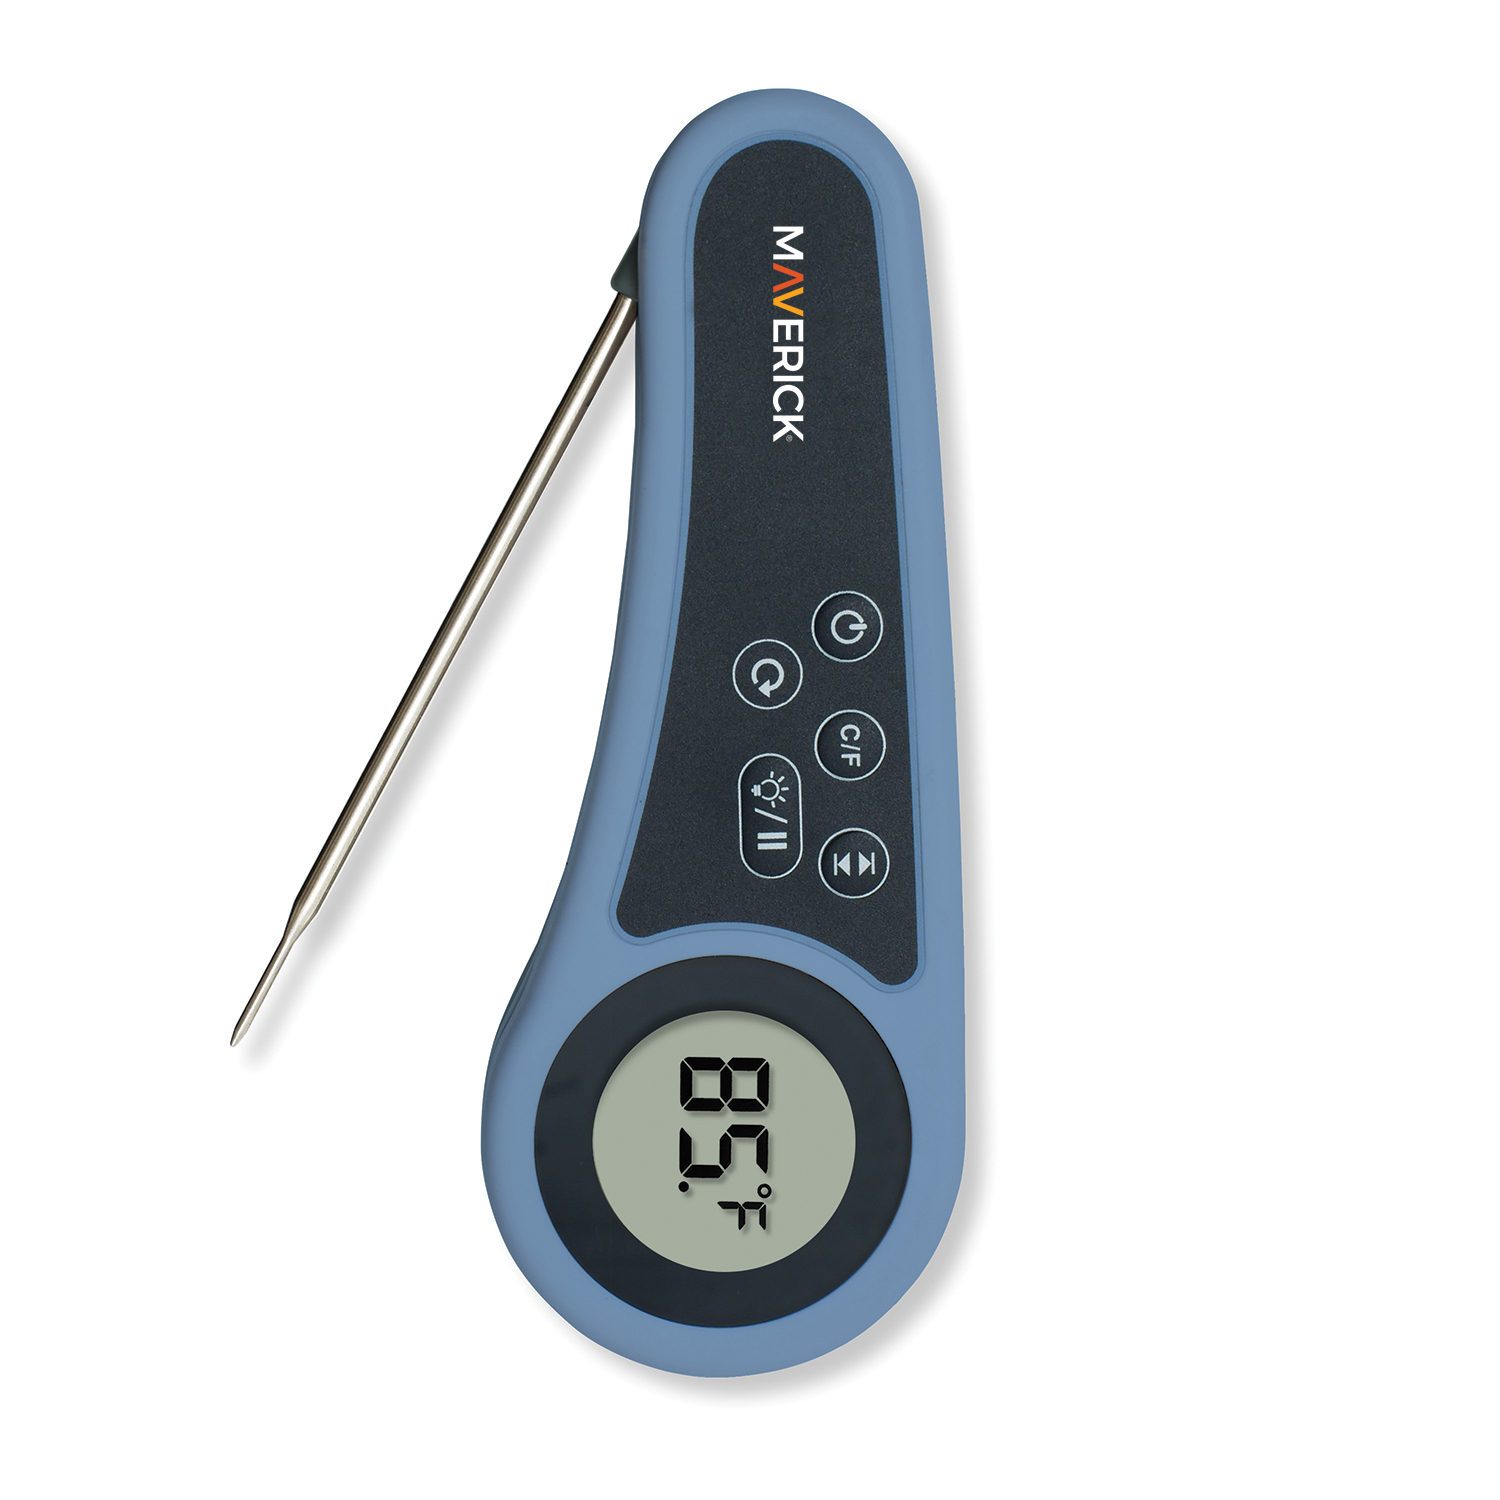 LSENLTY Digital Instant Read Meat Thermometer, IP67 Waterproof Thermom